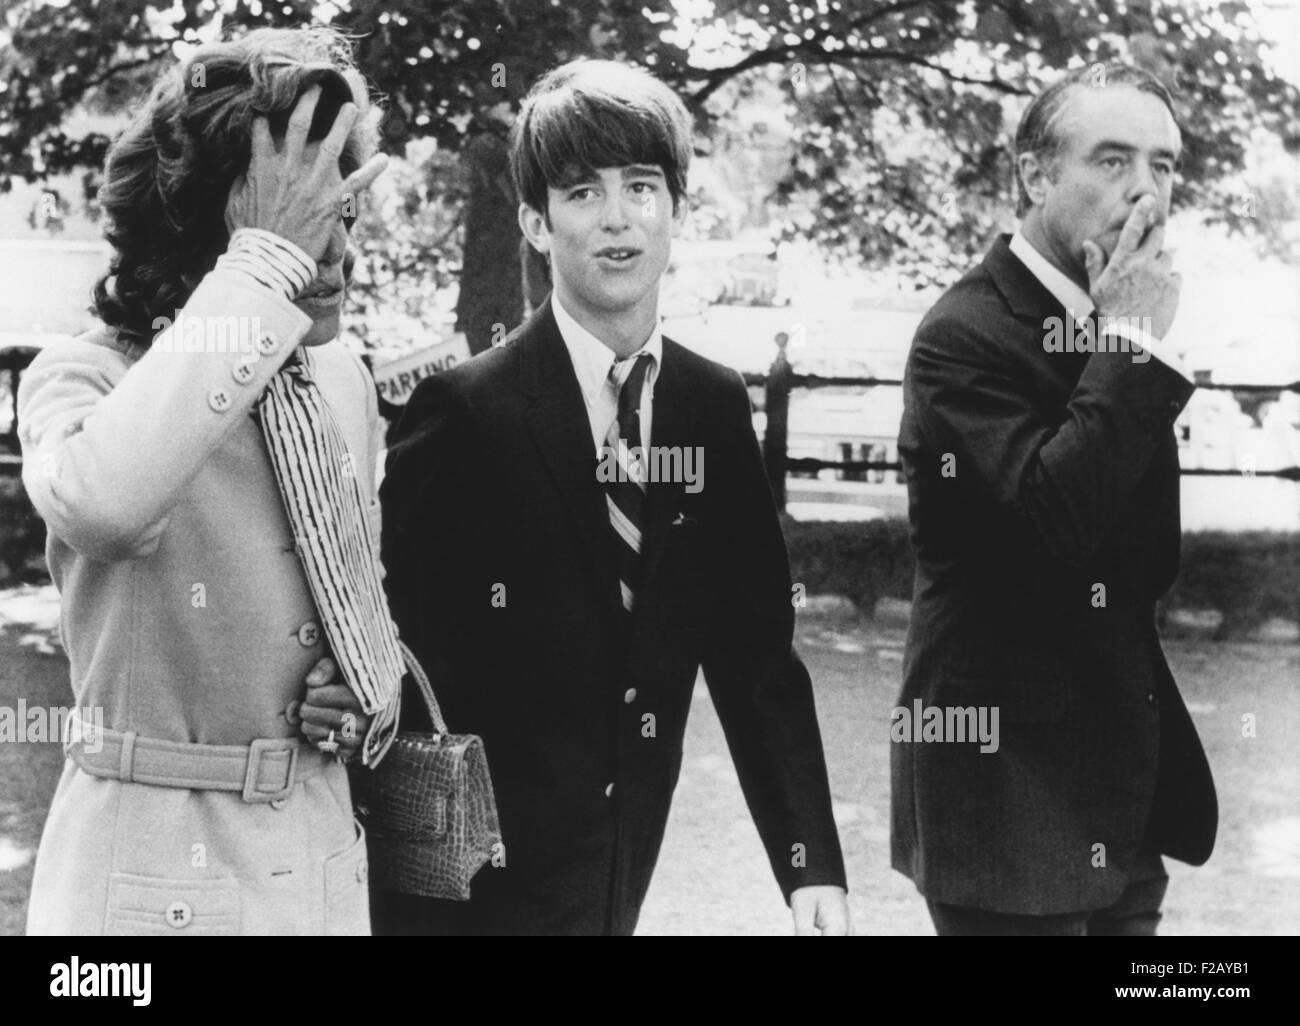 16 year old Robert Sargent Shriver III going to court after a drug arrest in July 1970. He is accompanied by his parents, Eunice Kennedy Shriver and Sargent Shriver in Barnstable, Massachusetts, Aug. 6, 1970. (CSU 2015 9 803) Stock Photo